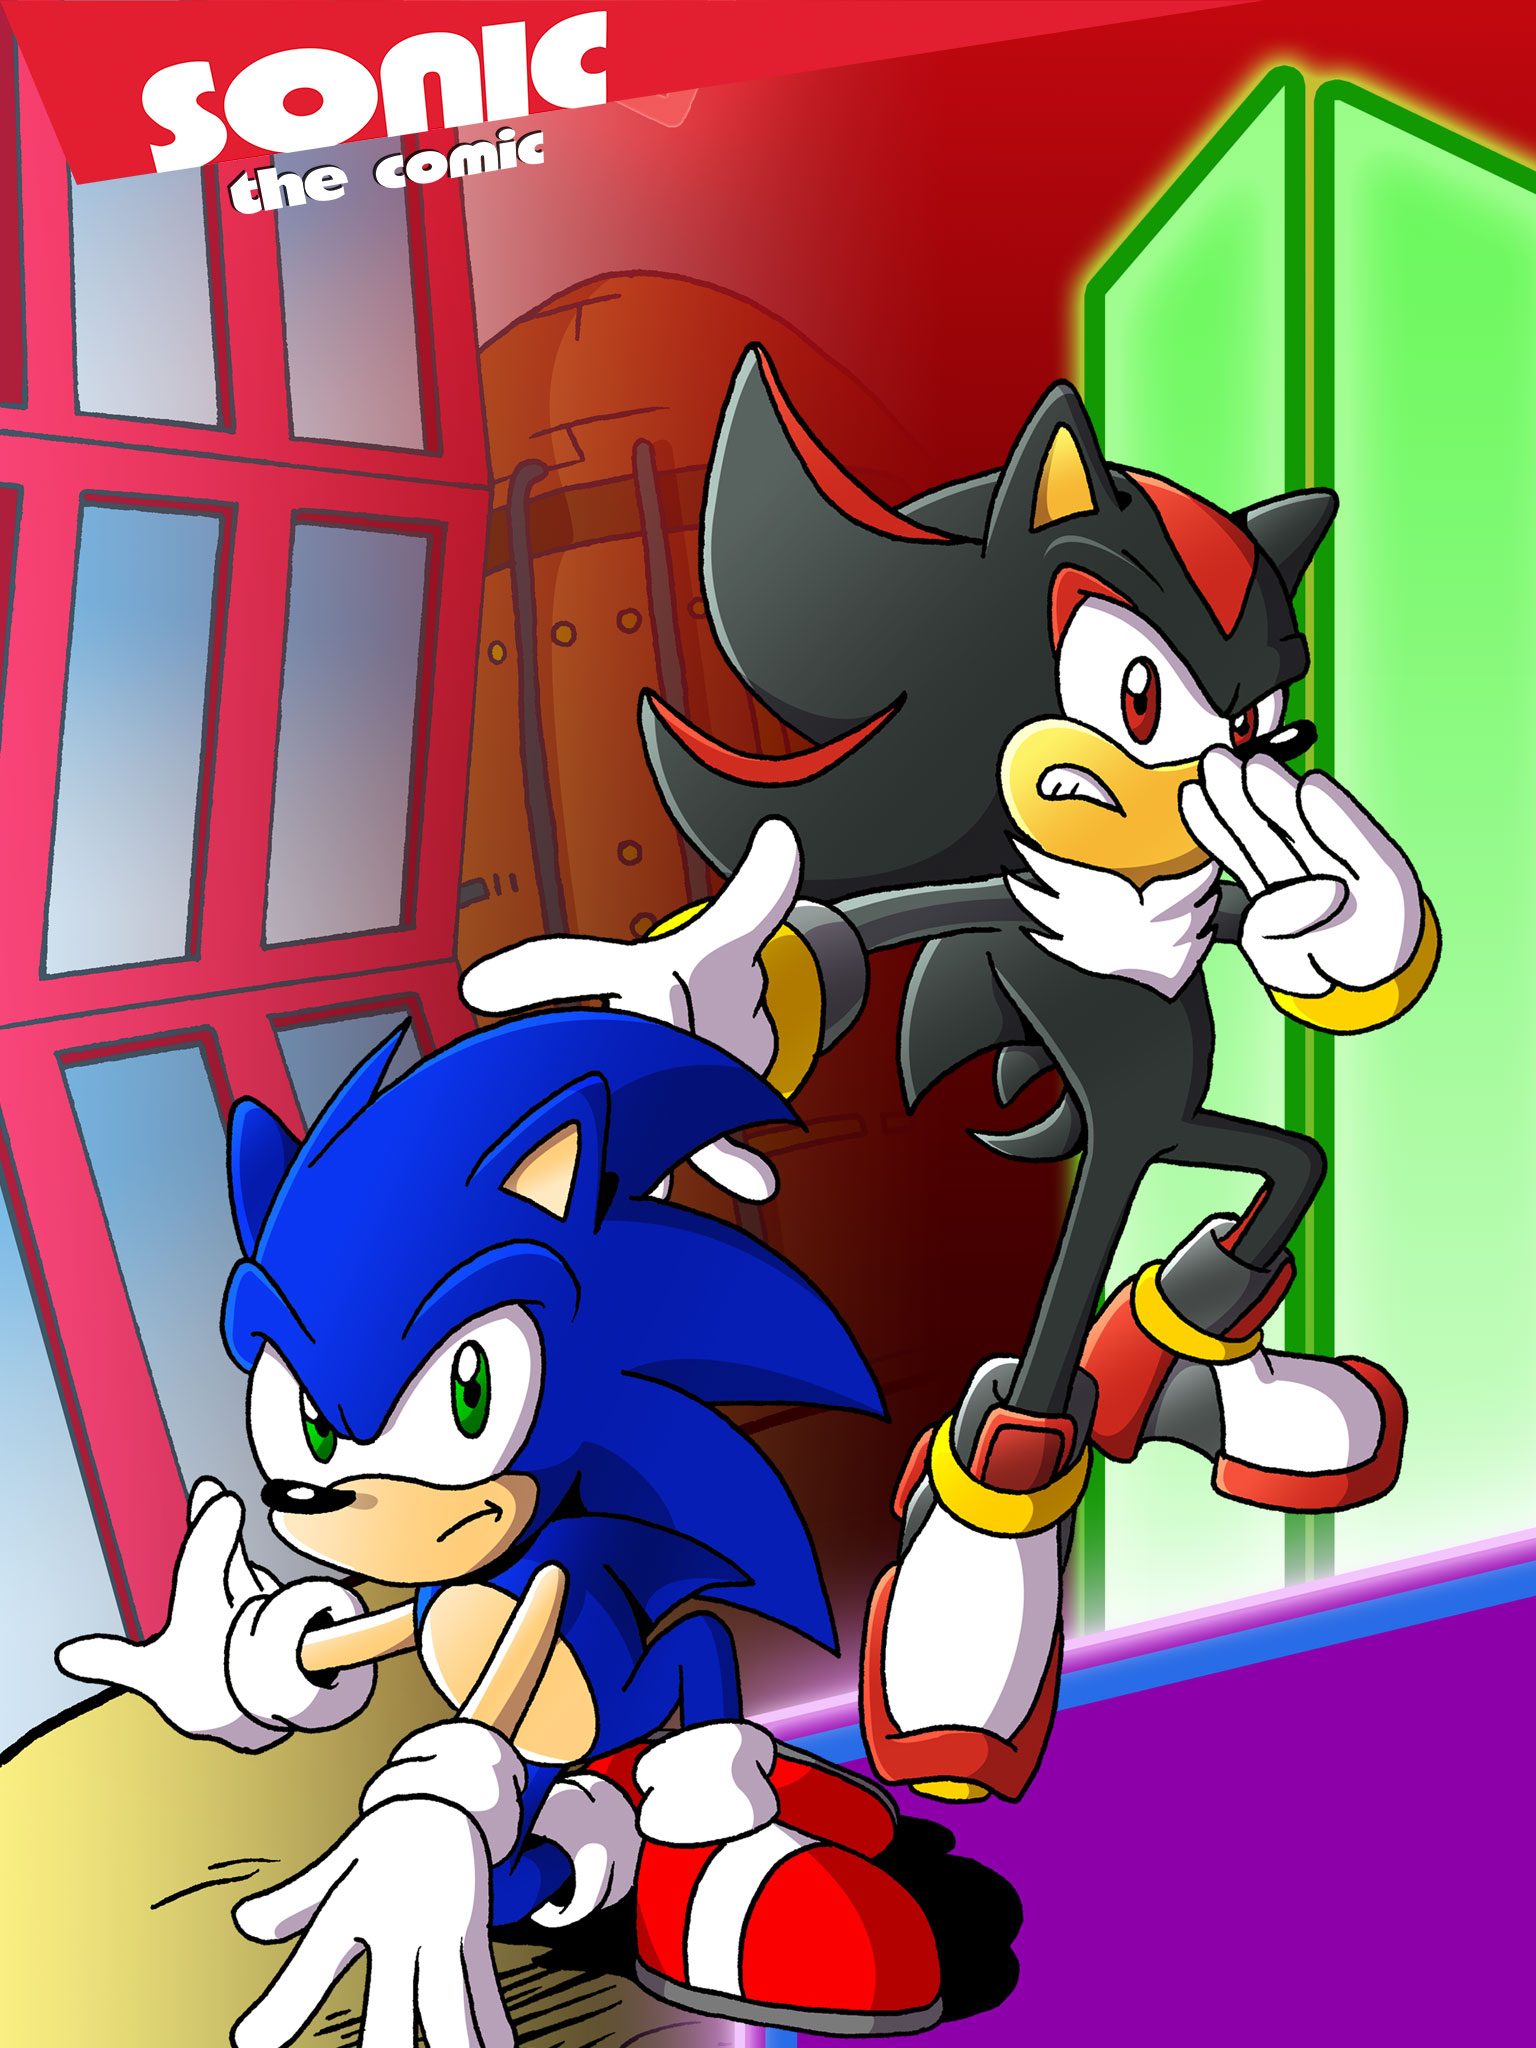 Sonic Tales: Sonic the Hedgehog #260